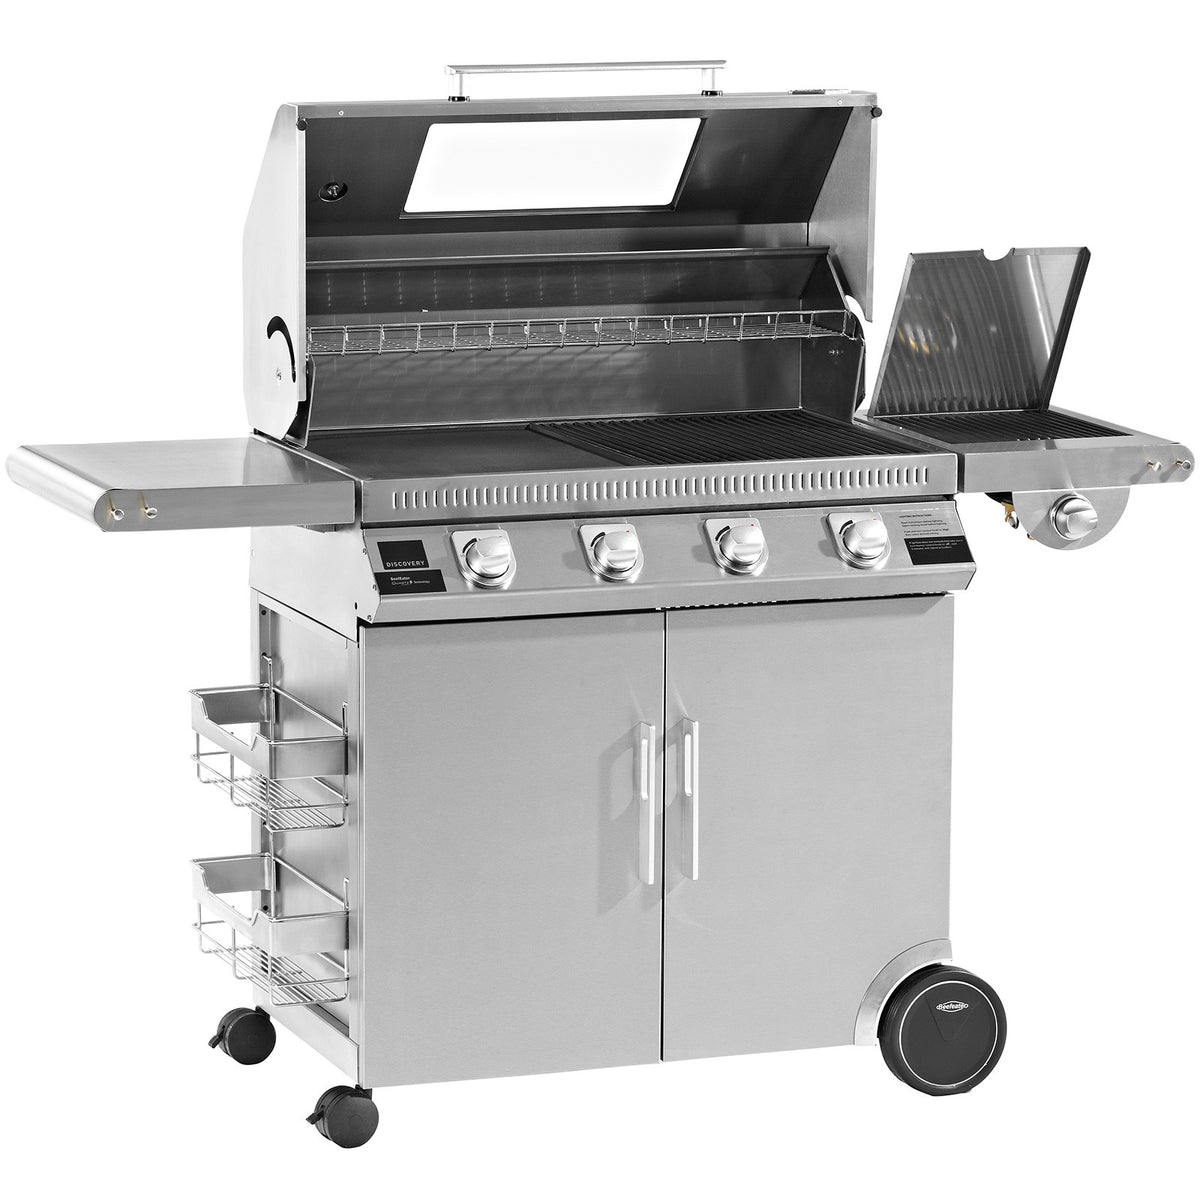 BeefEater Discovery 1100S Series 4 Burner Gas Barbecue with Stainless Steel Cabinet Trolley and Side Burner